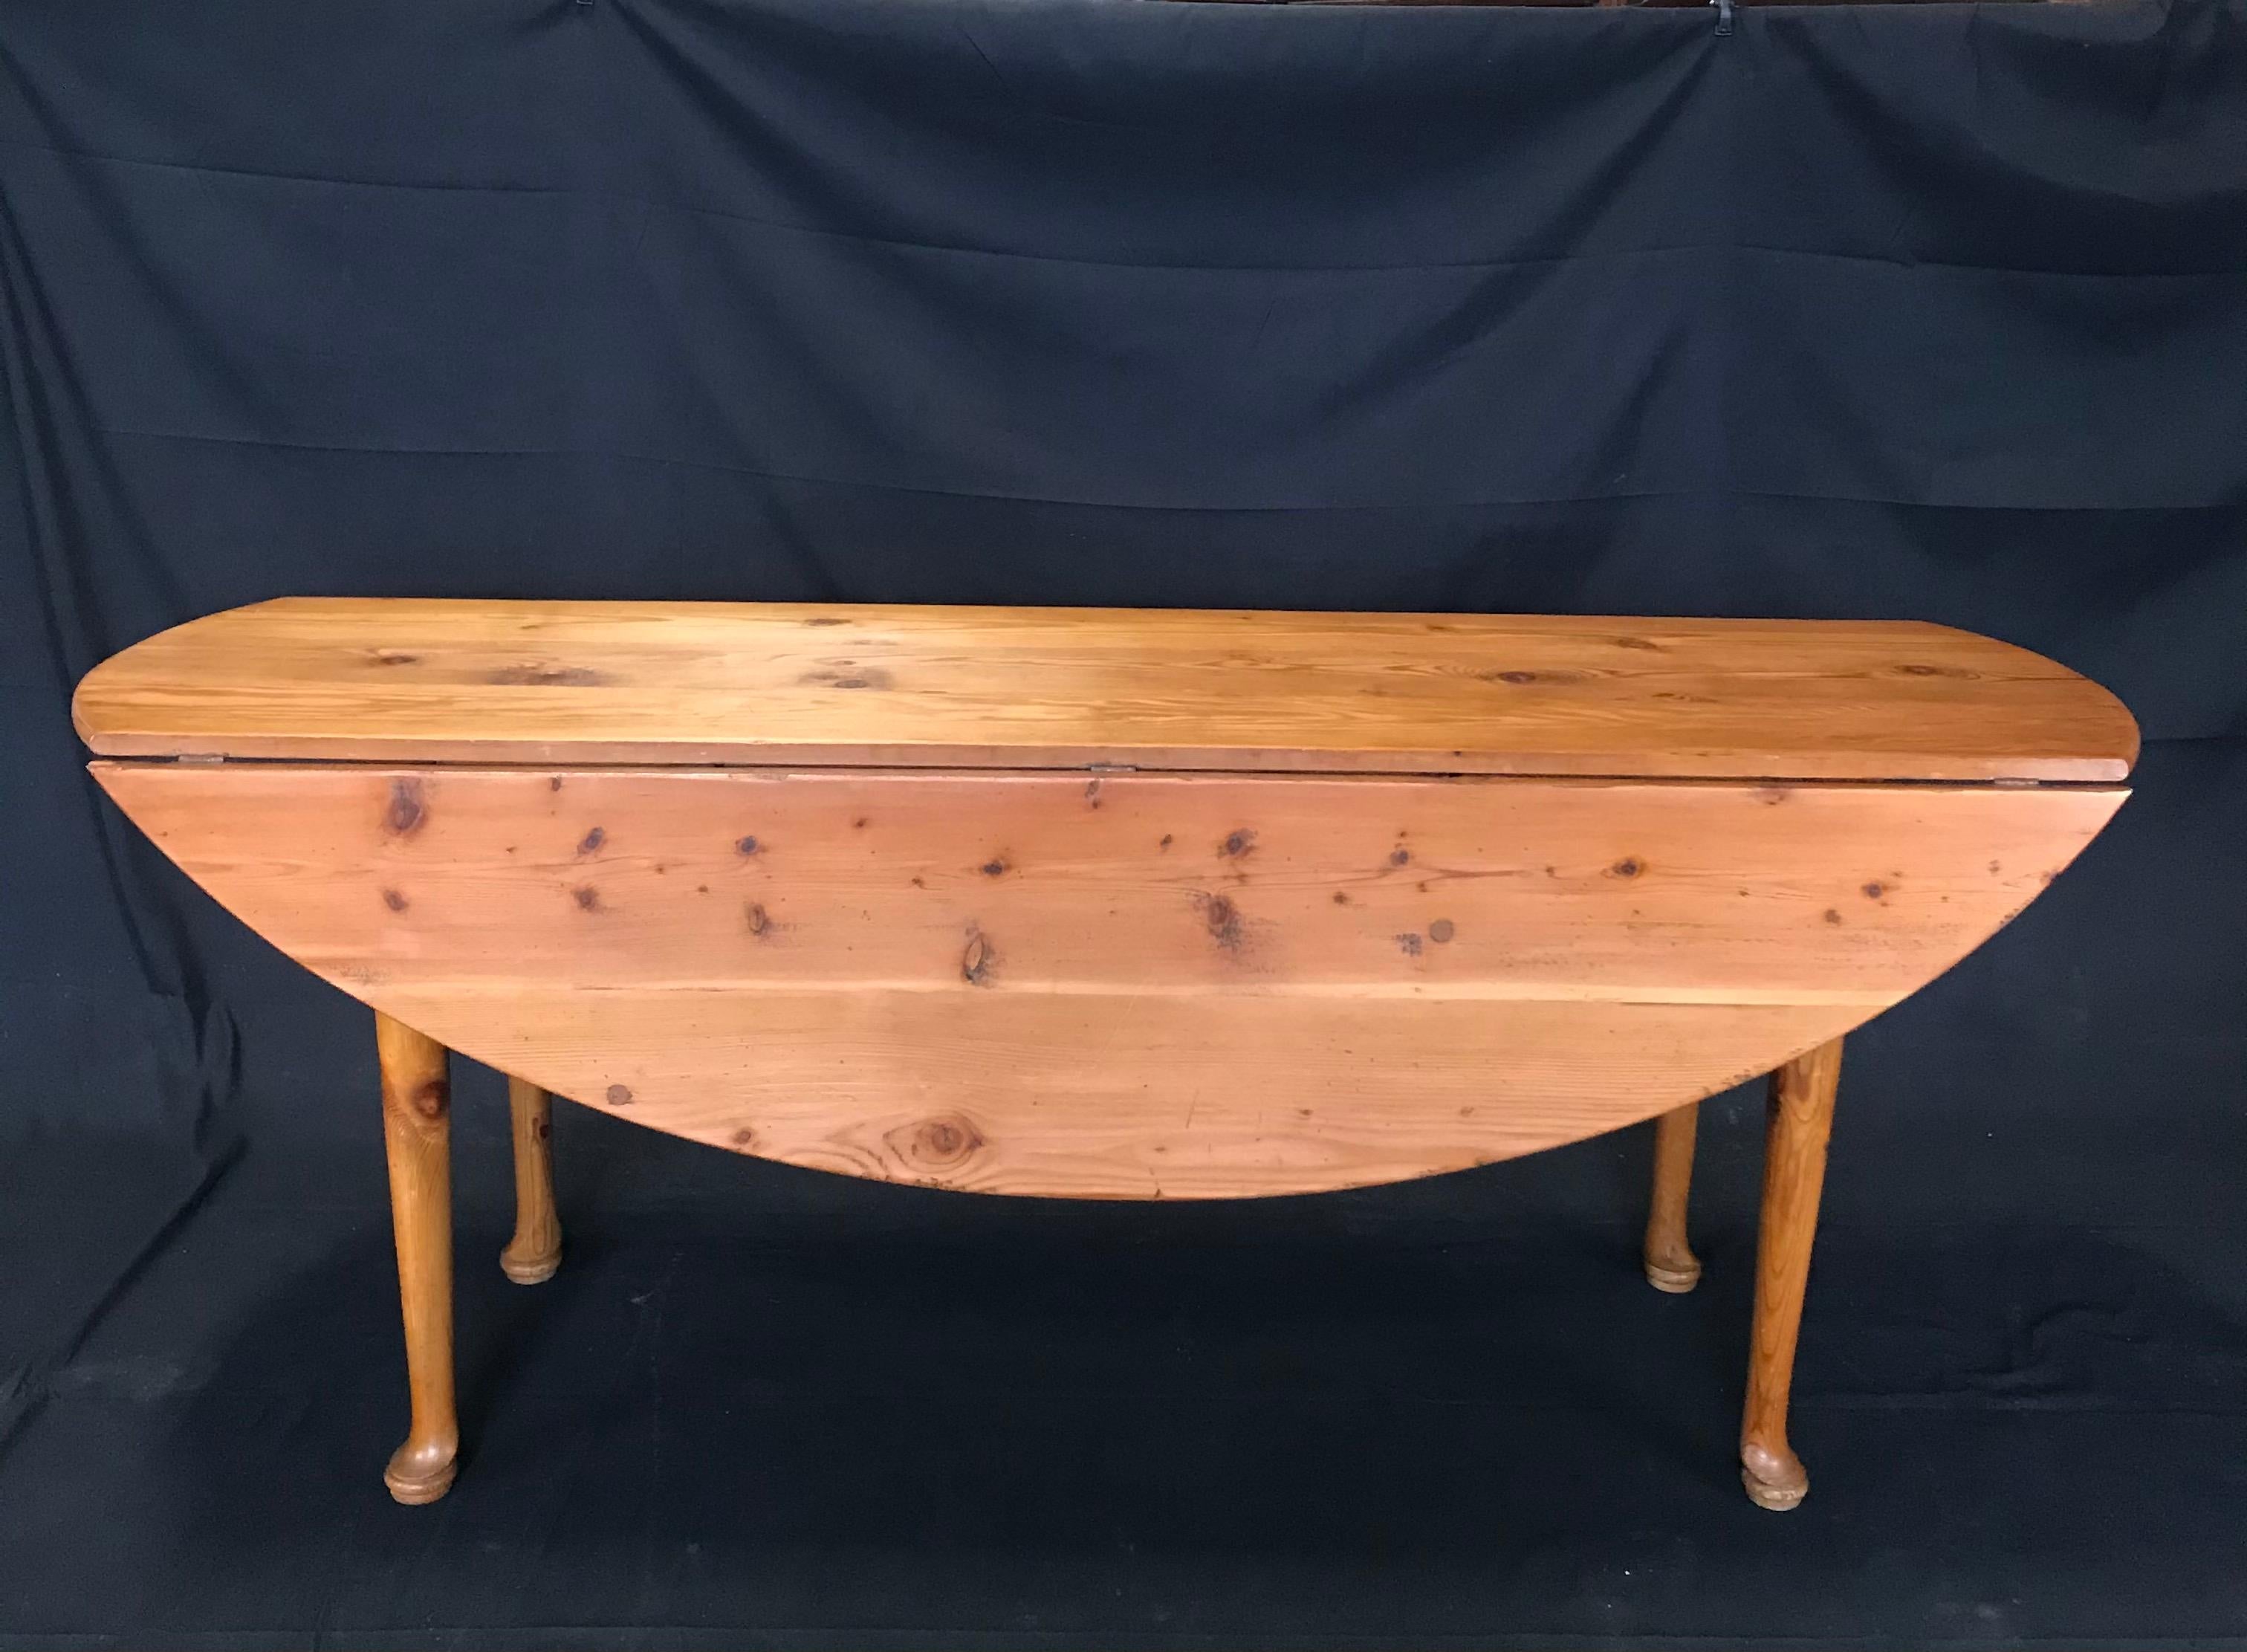 Versatile stunning Irish pine hunt or wake table in fabulous condition having four turned legs ending with hoofed bun feet. Both sides of the table are drop leaves. Once the leaves are upright the table becomes oval in shape and seats eight. When